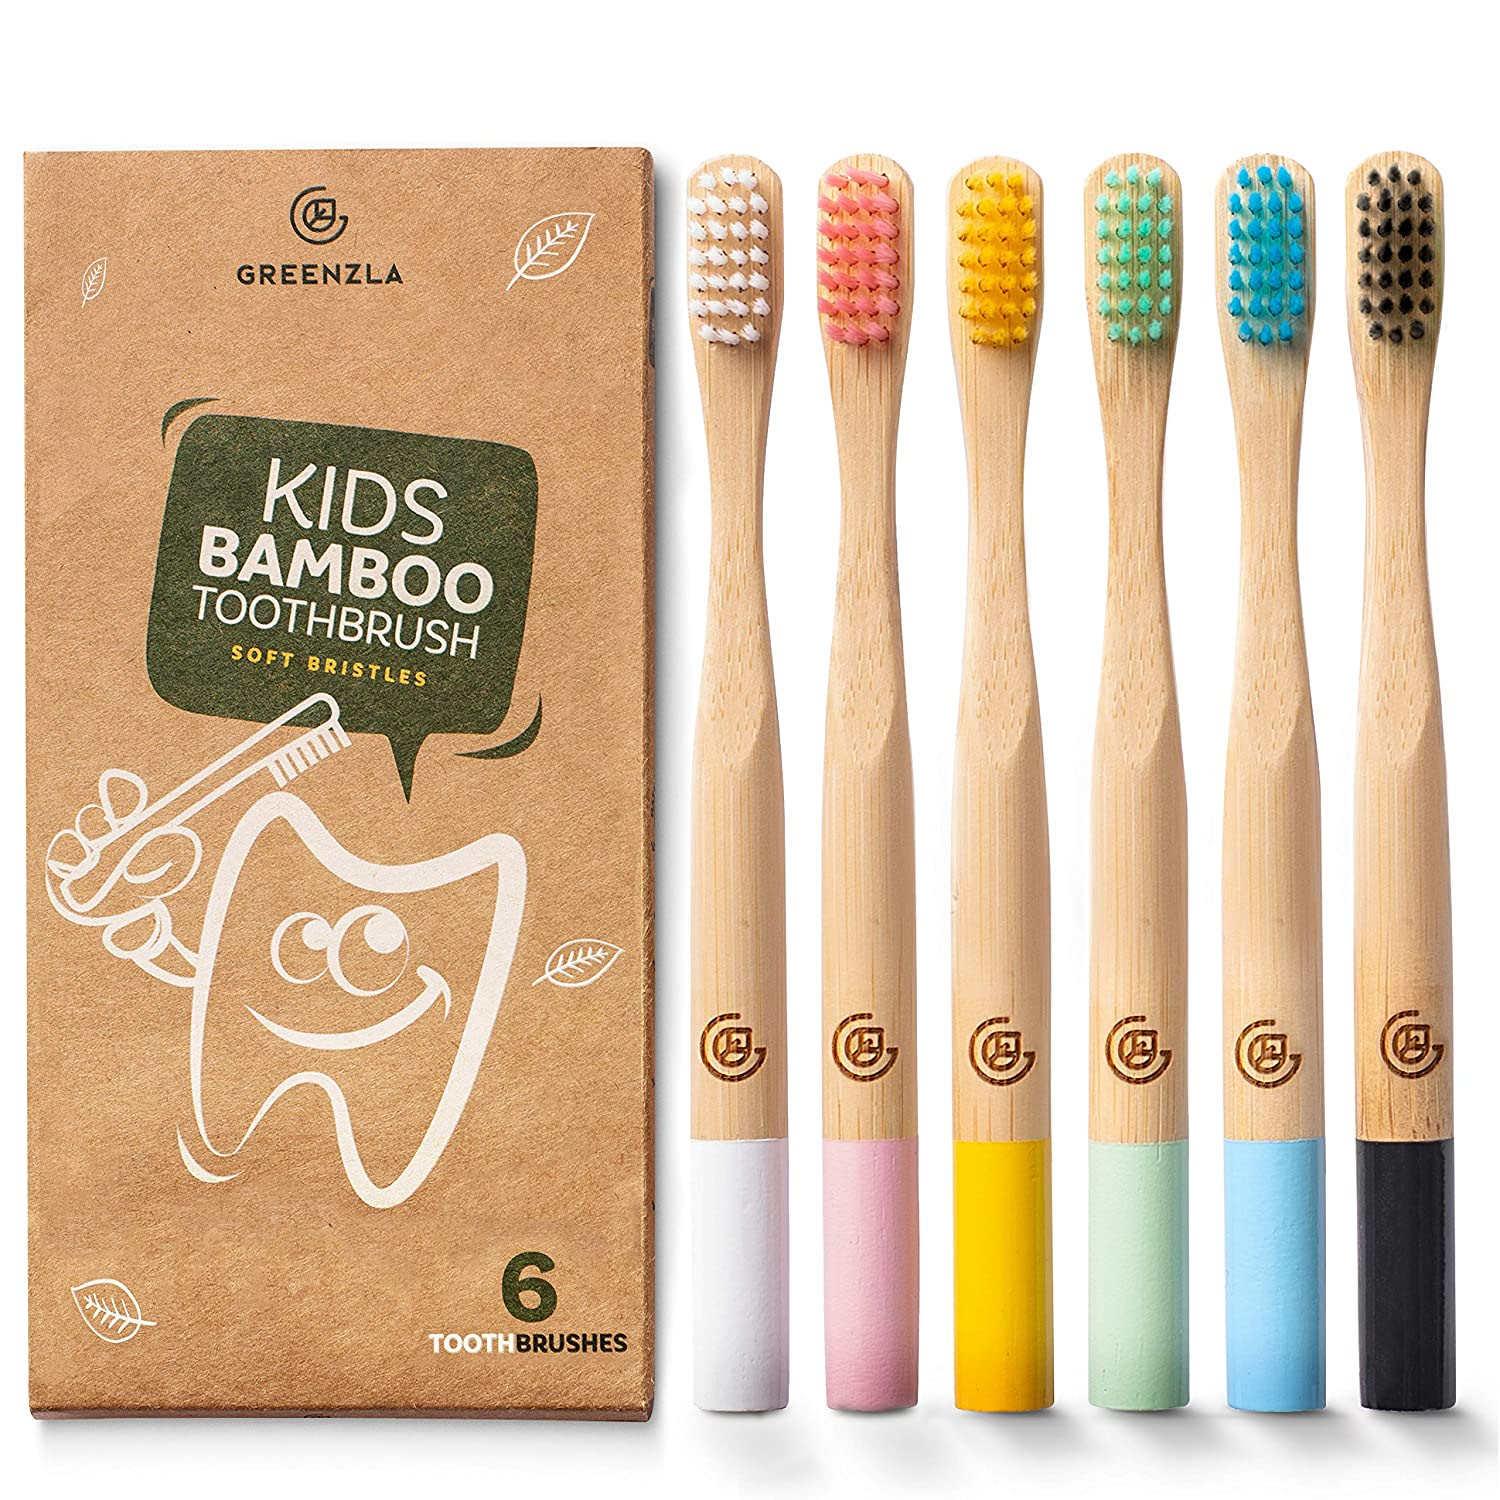 Image of Kids Bamboo Toothbrushes, BPA Free Soft Bristles Eco-Friendly Natural Bamboo Toothbrush Set Biodegradable, Compostable & Organic, 6 Pack